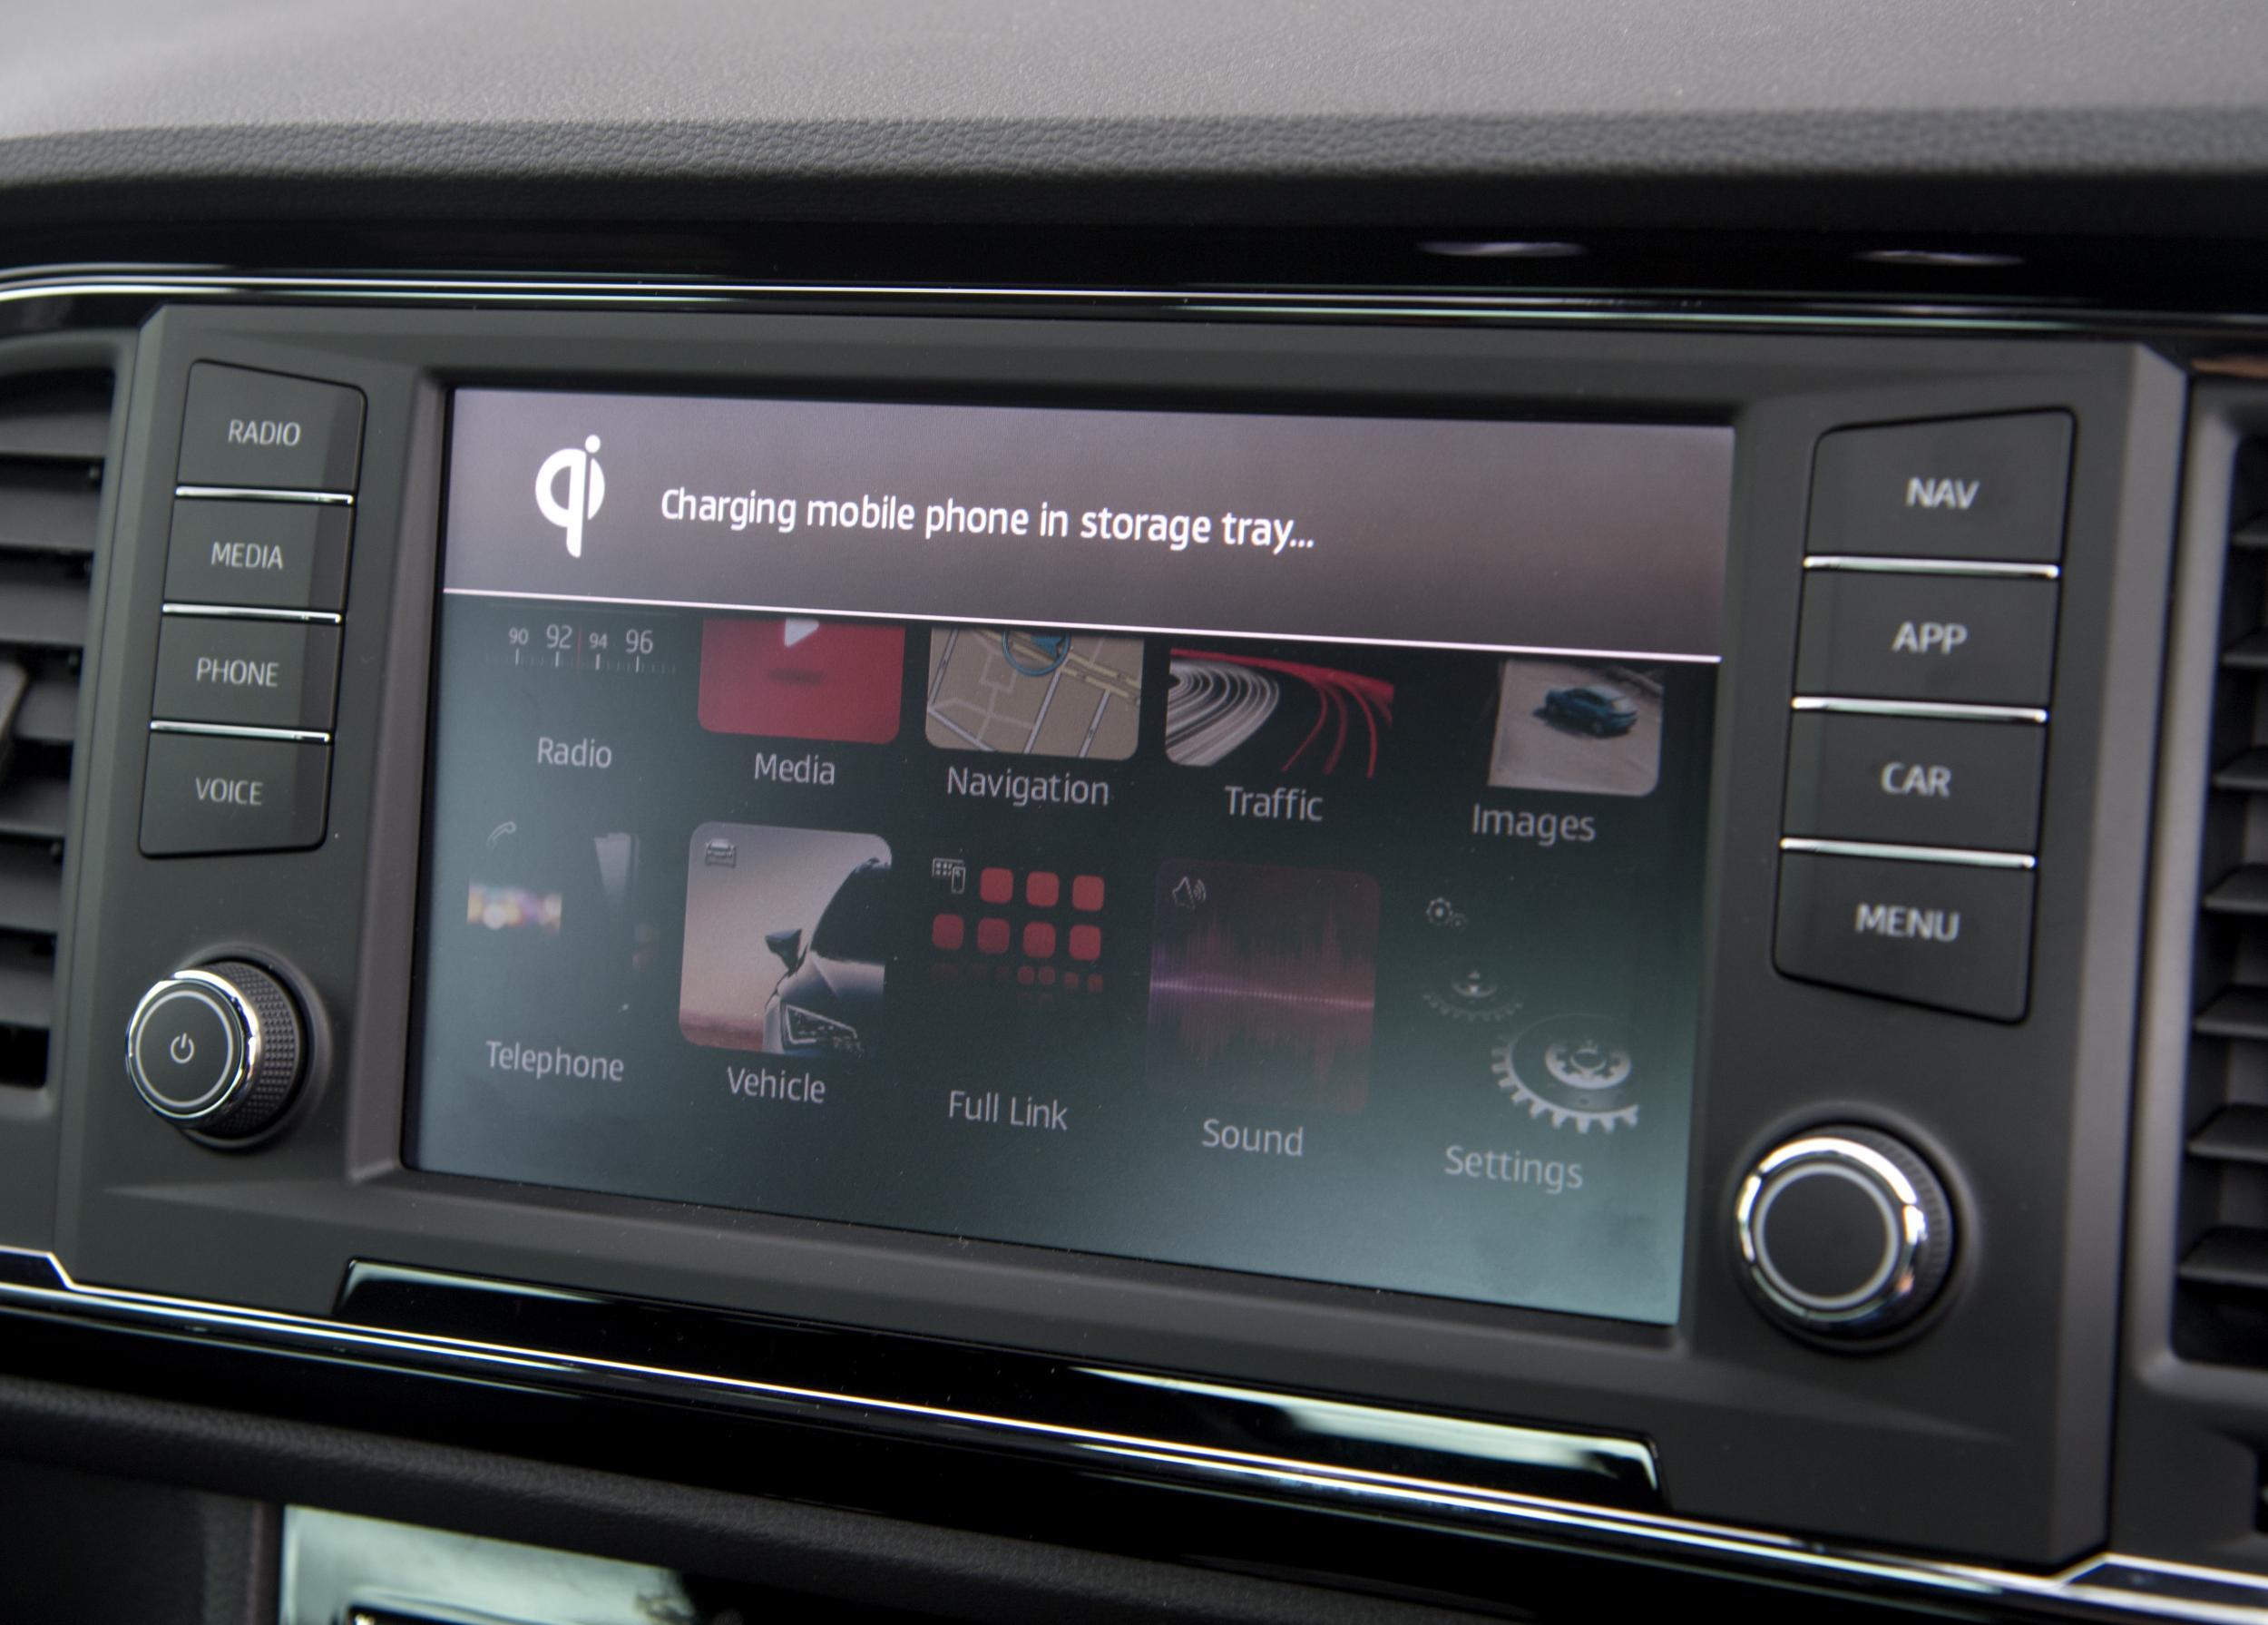 The Ateca's touch-sensitive screen is big and works well